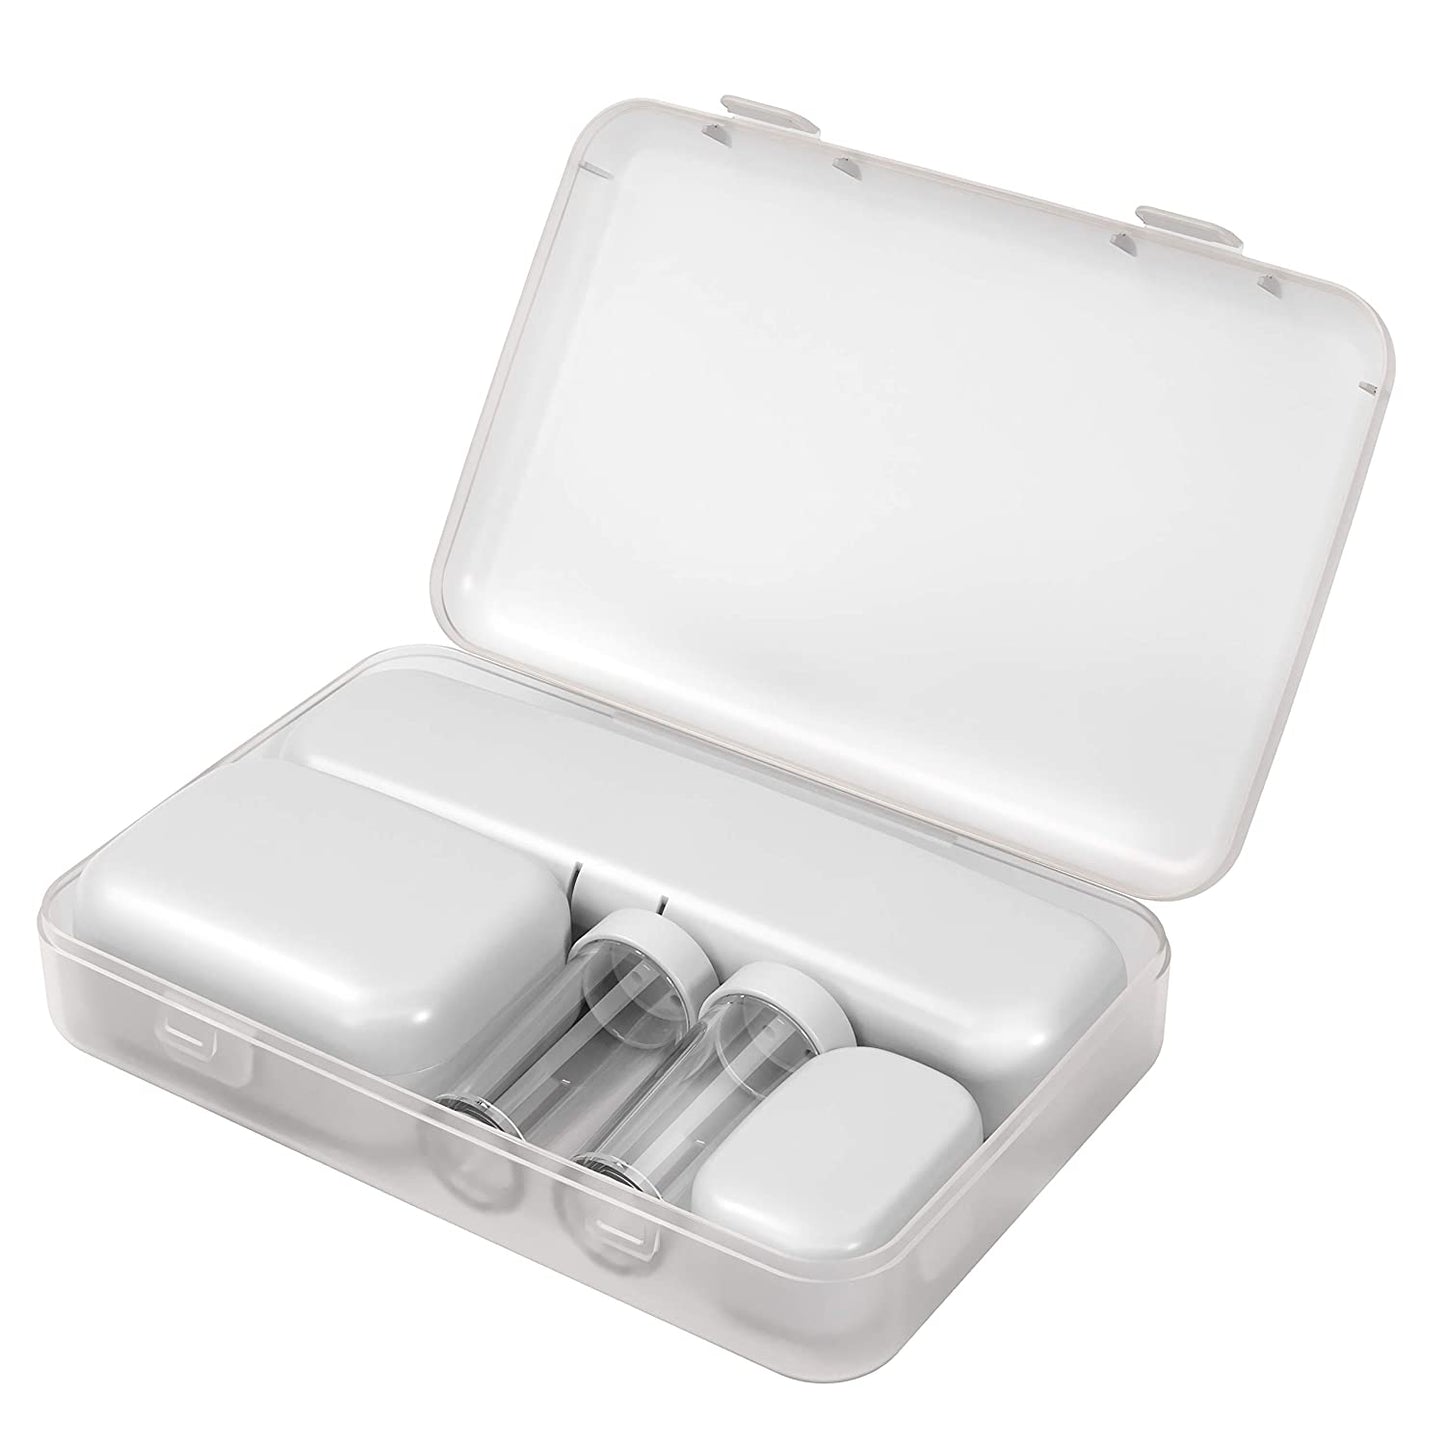 Hard Wall Unbreakable Travel Kit Container TSA Approved with Containers for Toiletries Travel Size.